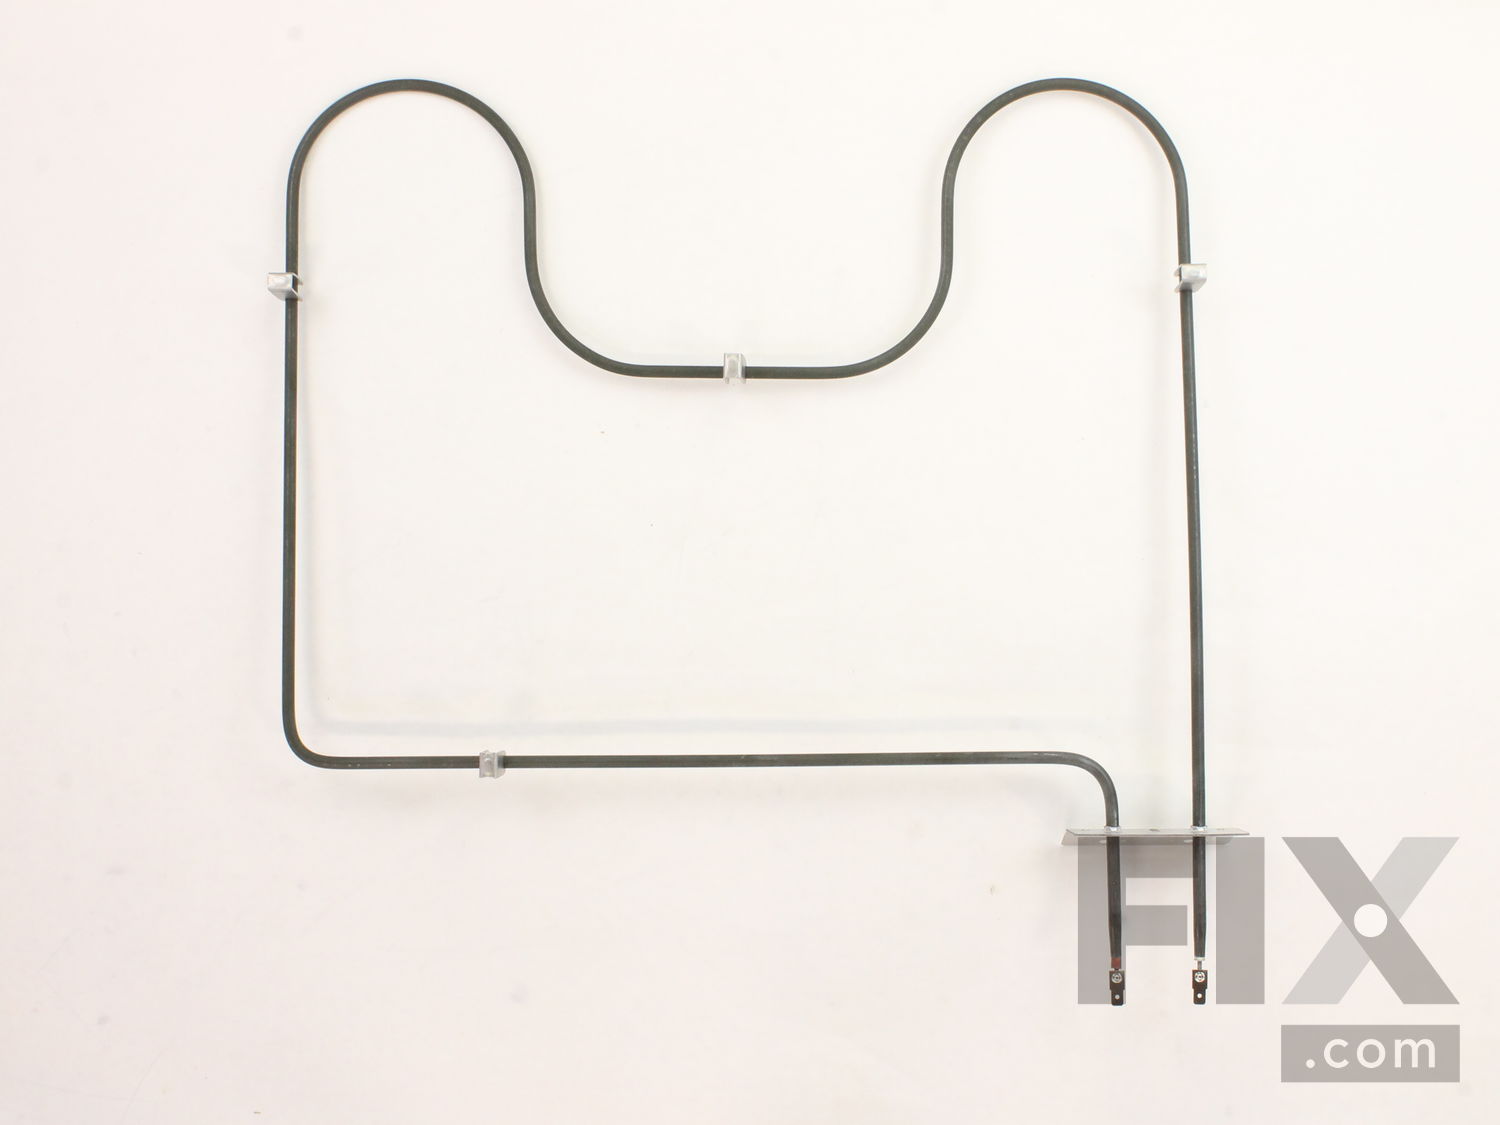 Maytag Range Replacement Oven Heating Element Replaces 74004107 7406P428-60